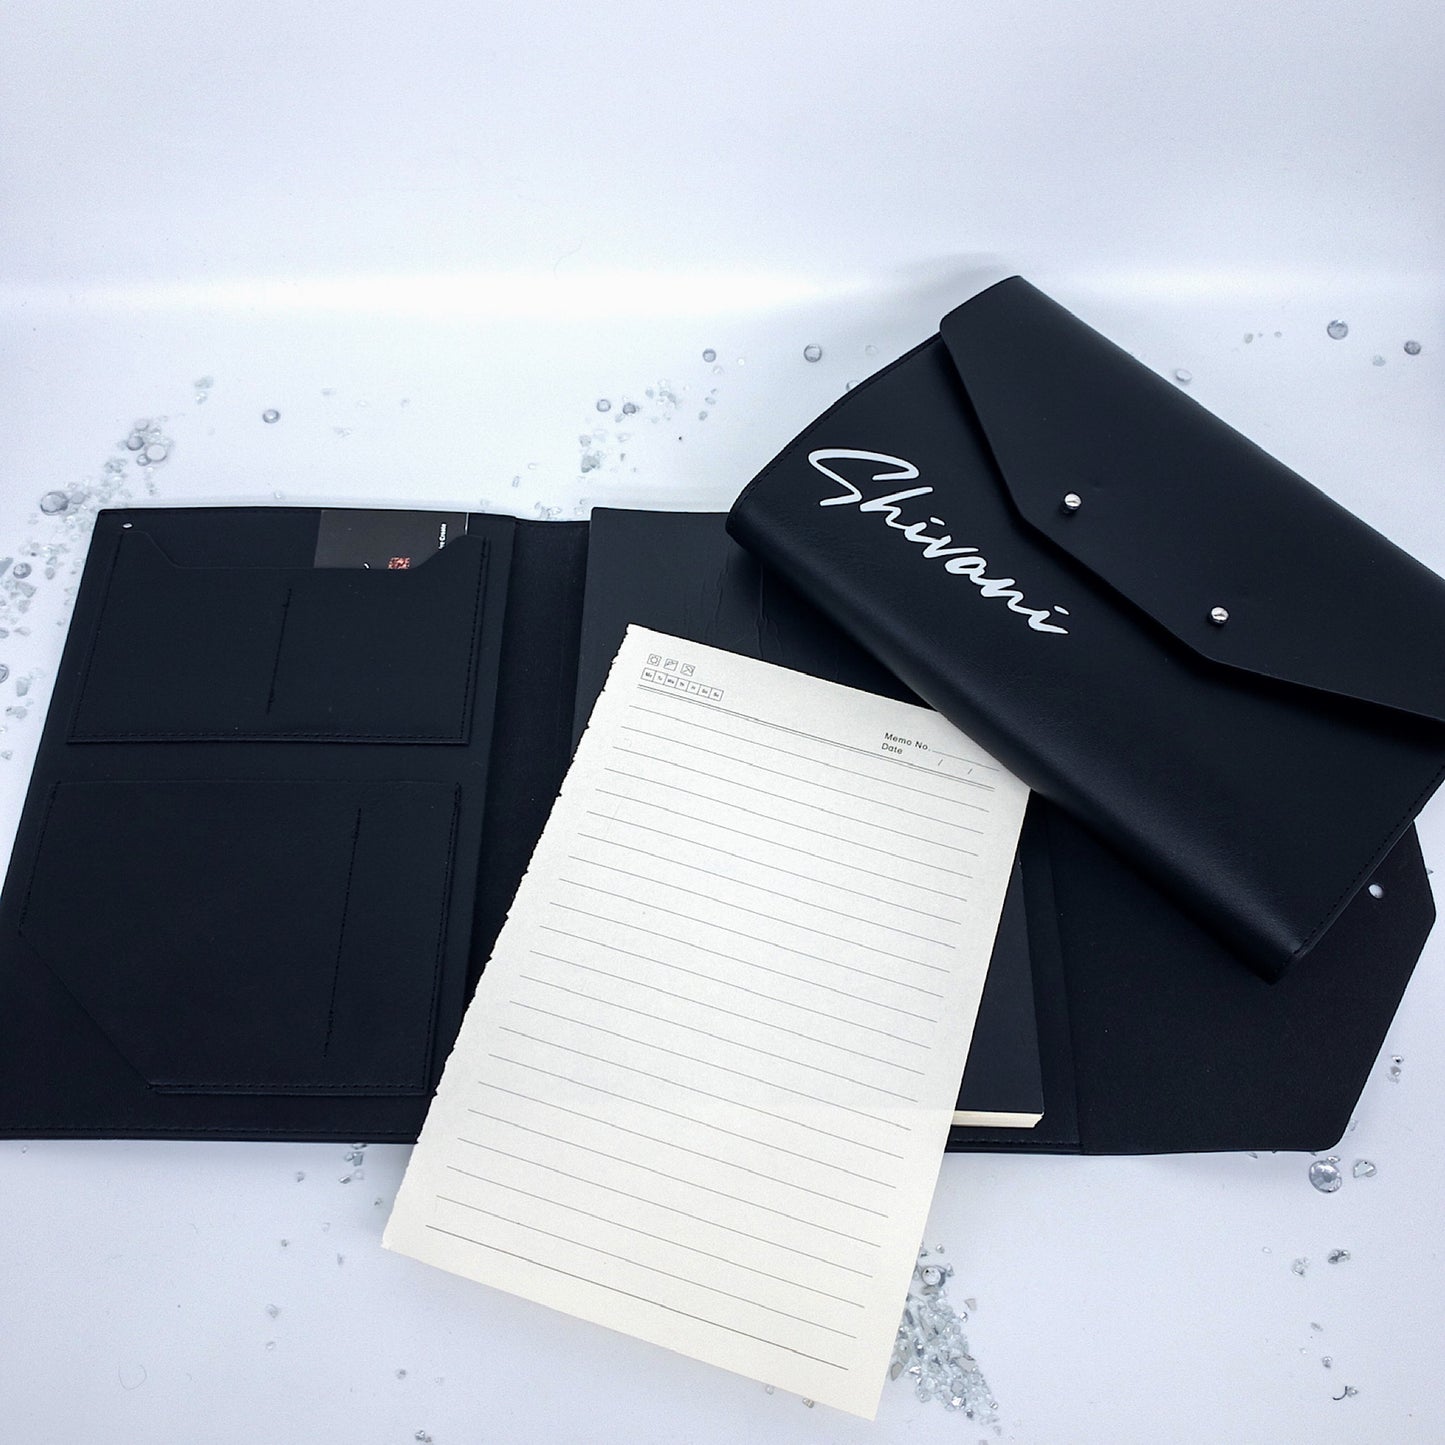 Custom Personalized PU Soft Leather Stylish Daily Planner Journal Agenda Notebook. Pink Black with Metal Closure Studs.